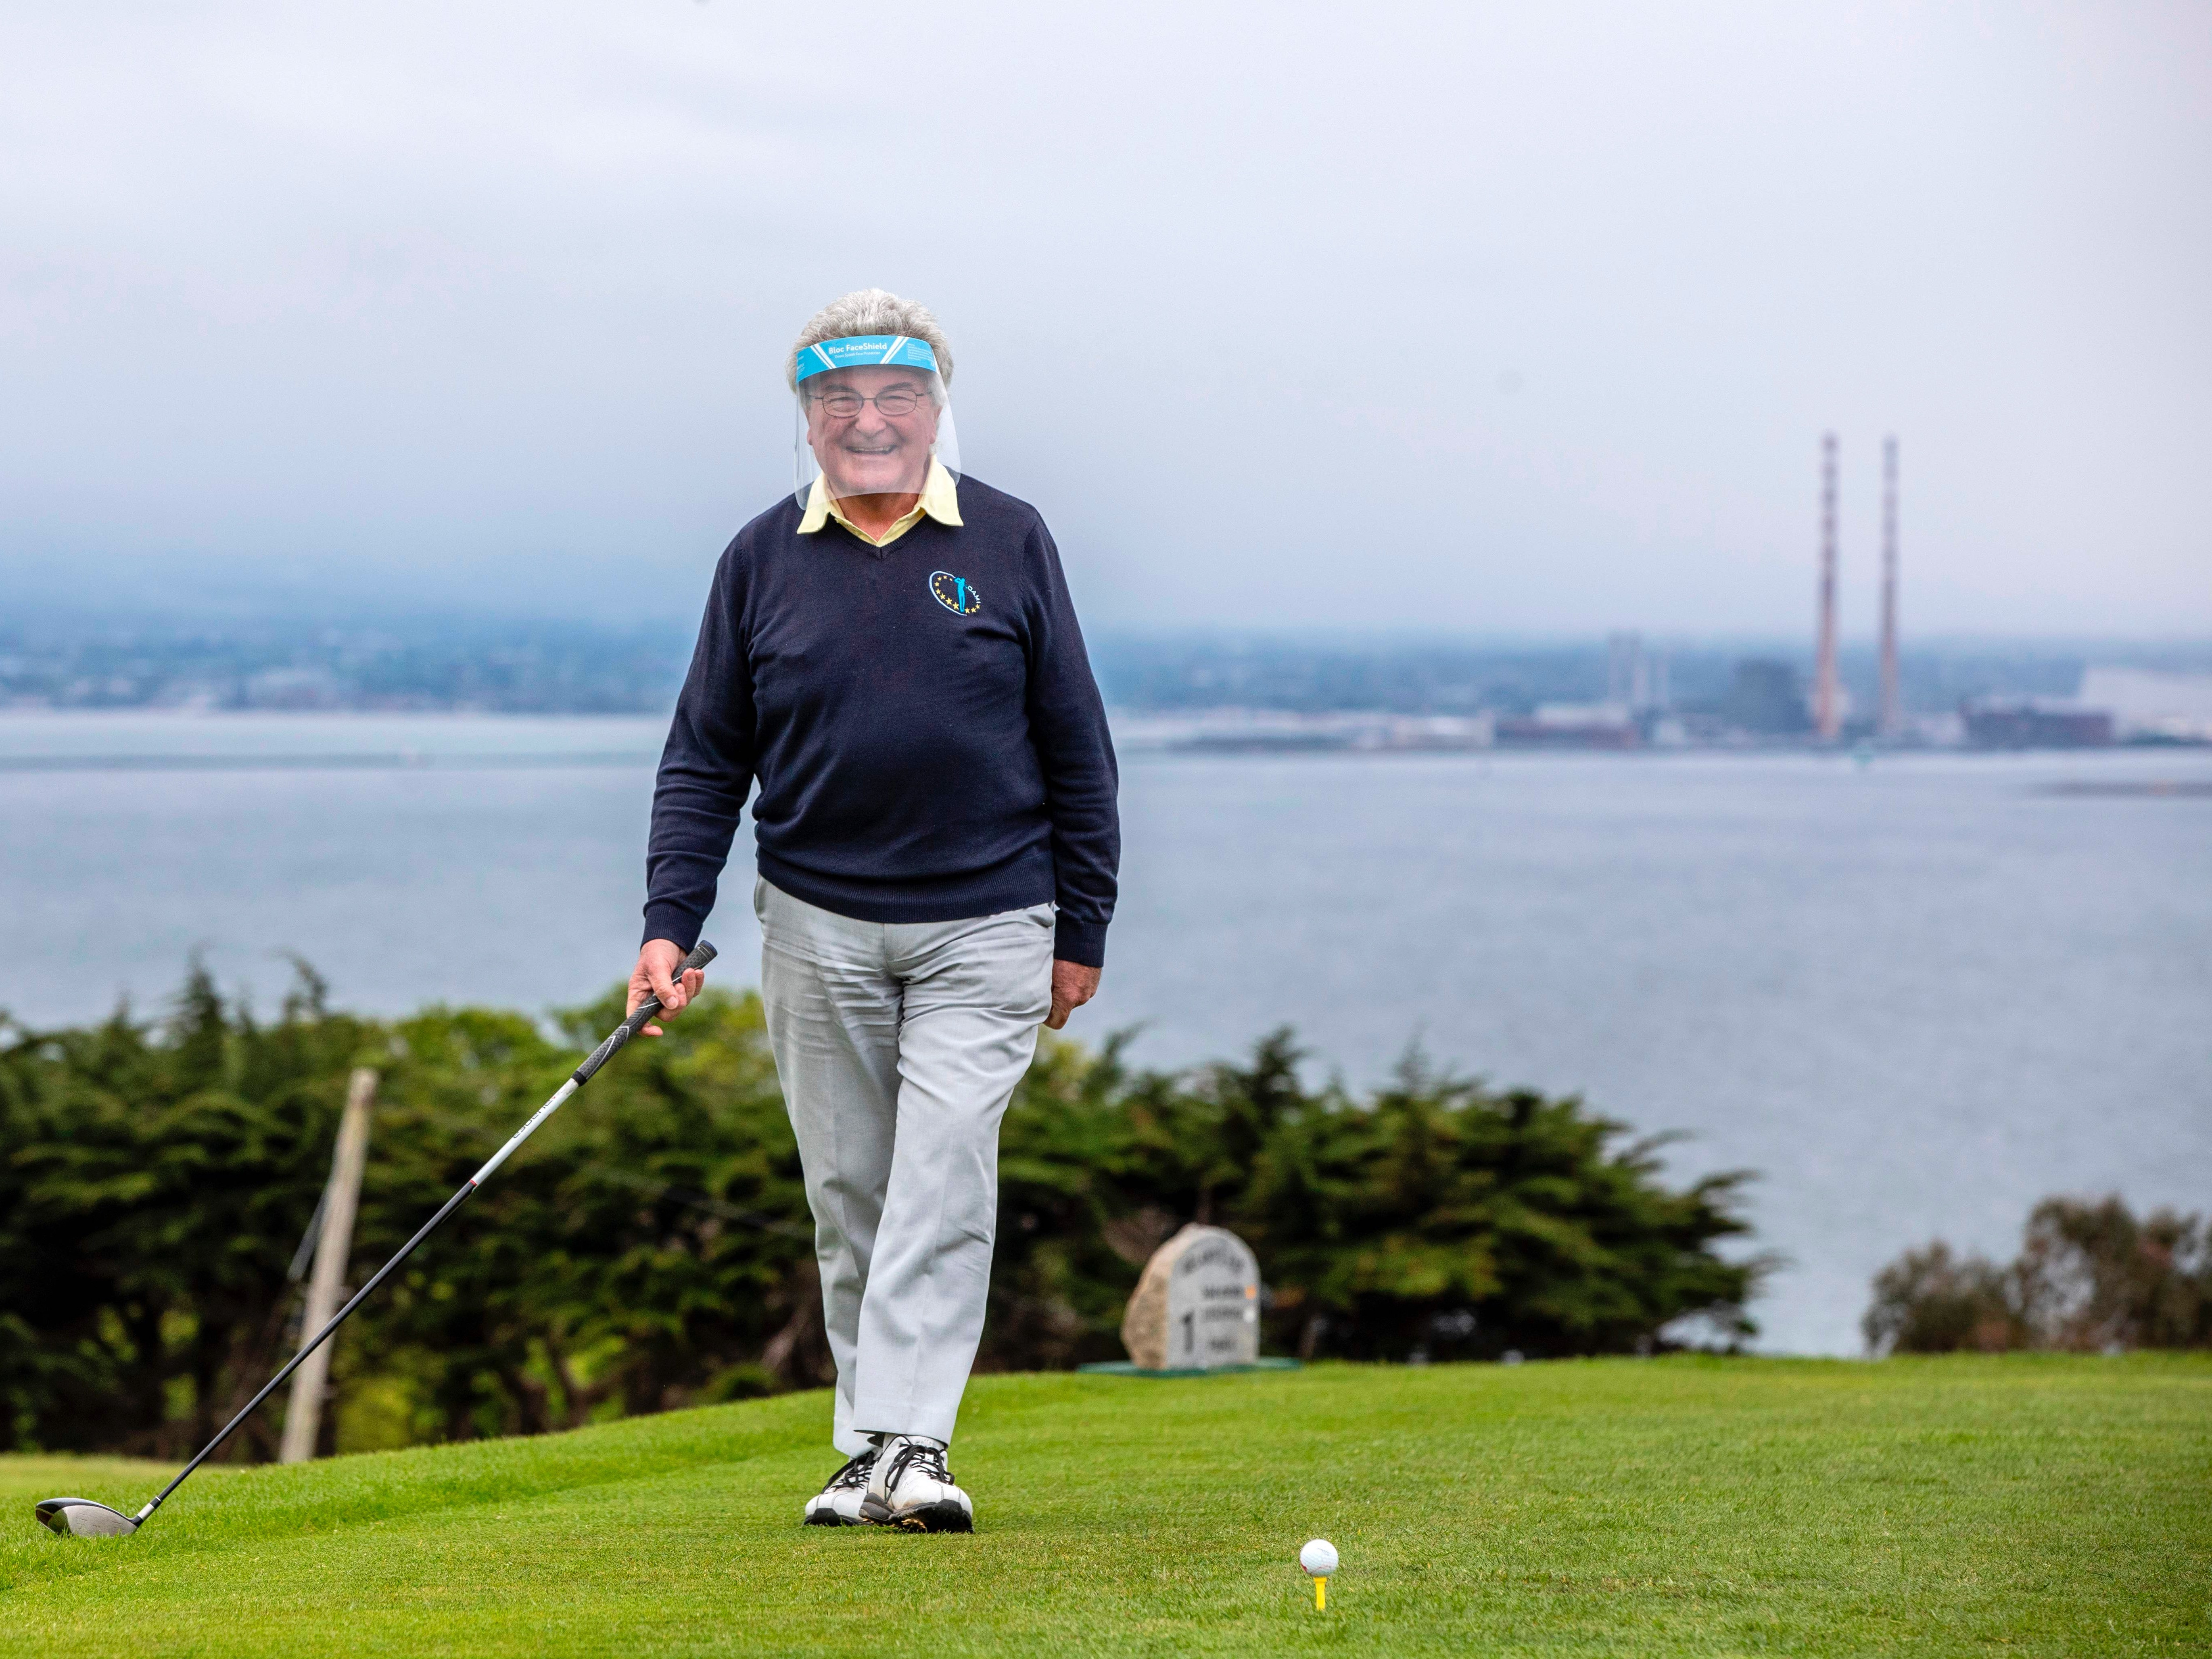 Michael O'Hanlon, wearing a protective visor, smiles as he prepares to play from the first tee at Howth Golf Club in Dublin on May 18, 2020, as golf courses reopen and Ireland cautiously begins to lift it's coronavirus lockdown. - Ireland launched the first tentative step in its plan to lift coronavirus lockdown on Monday, with staff returning to outdoor workplaces as some shops resumed trade and sports facilities unlocked their doors. (Photo by PAUL FAITH / AFP) (Photo by PAUL FAITH/AFP via Getty Images)